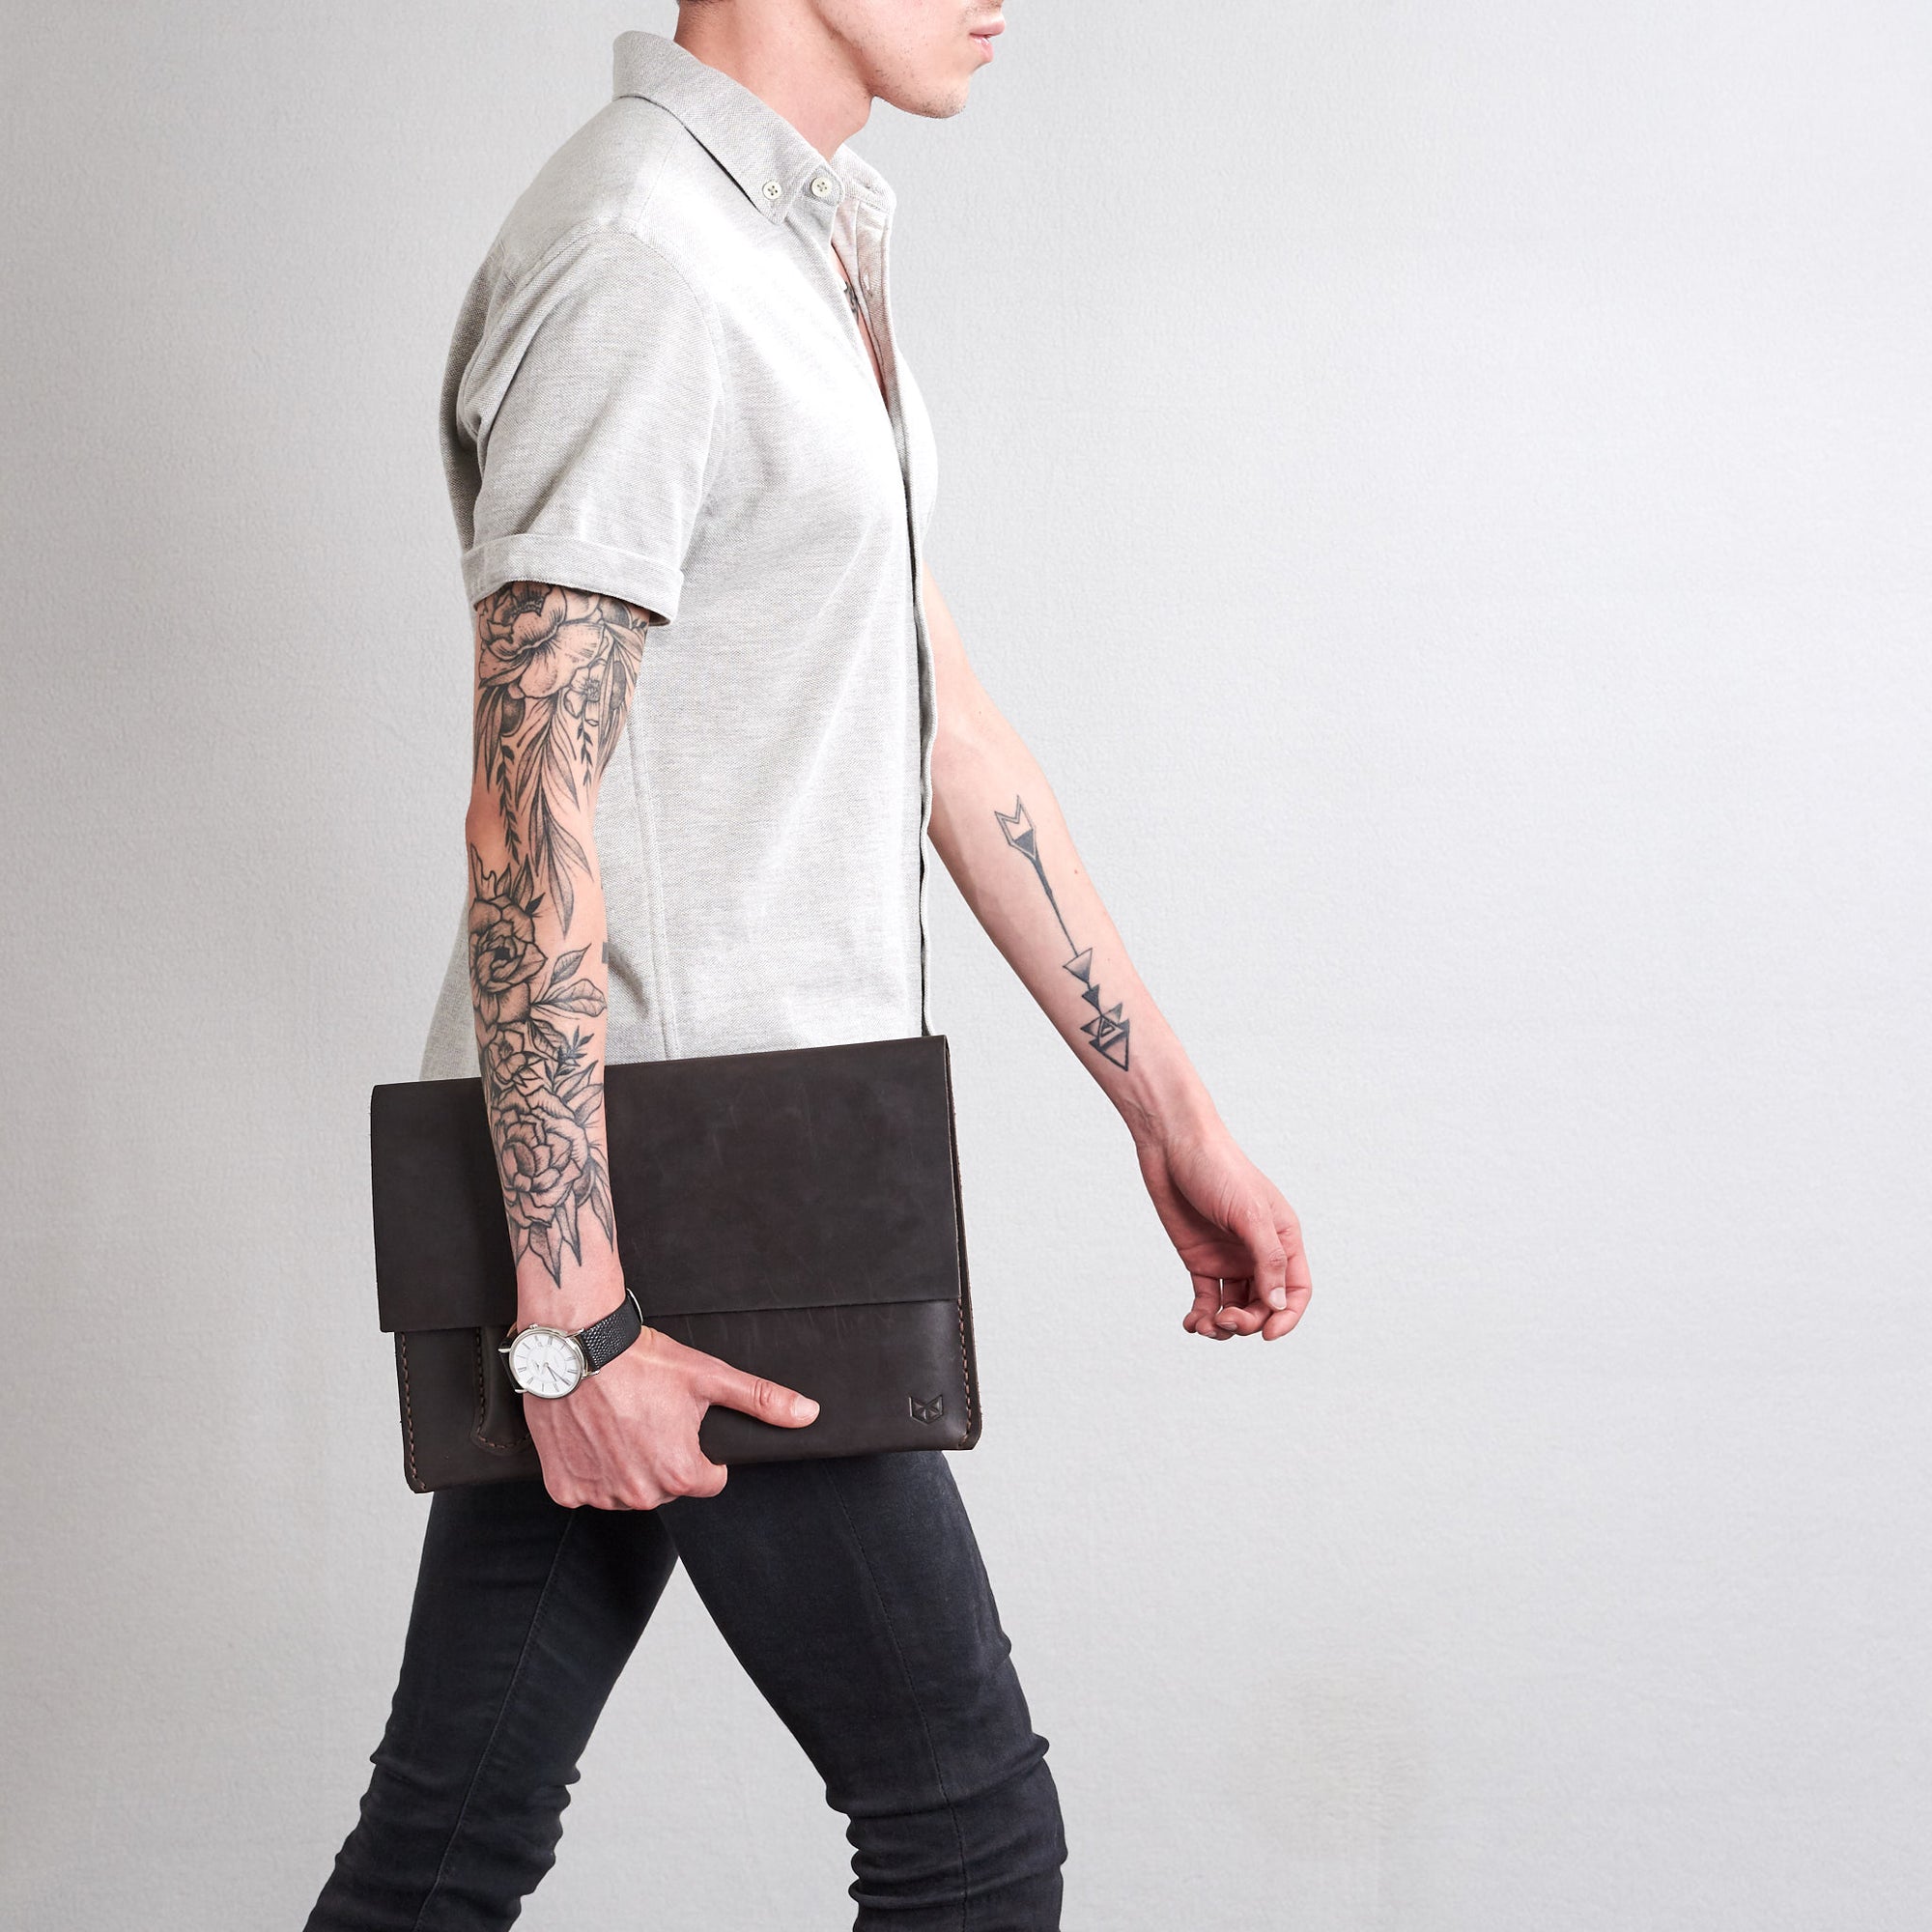 Style walking with case. Marron draftsman 2 case by Capra Leather. Microsoft Surface sleeve.